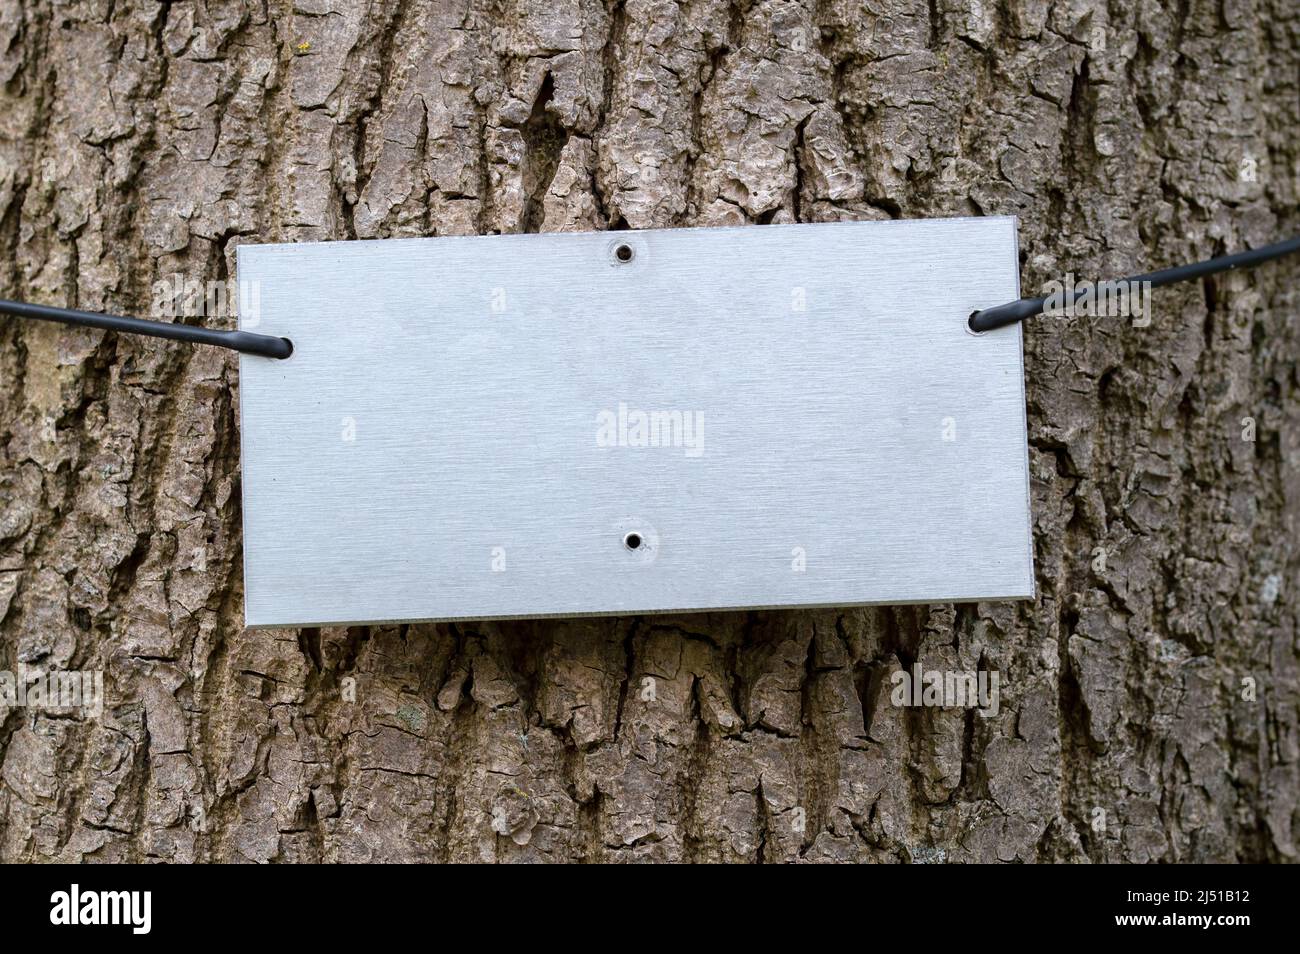 Metal Plate To Fill In Your Own Text On A Tree At Amsterdam The Netherlands 15-5-202215-5-2022 Stock Photo